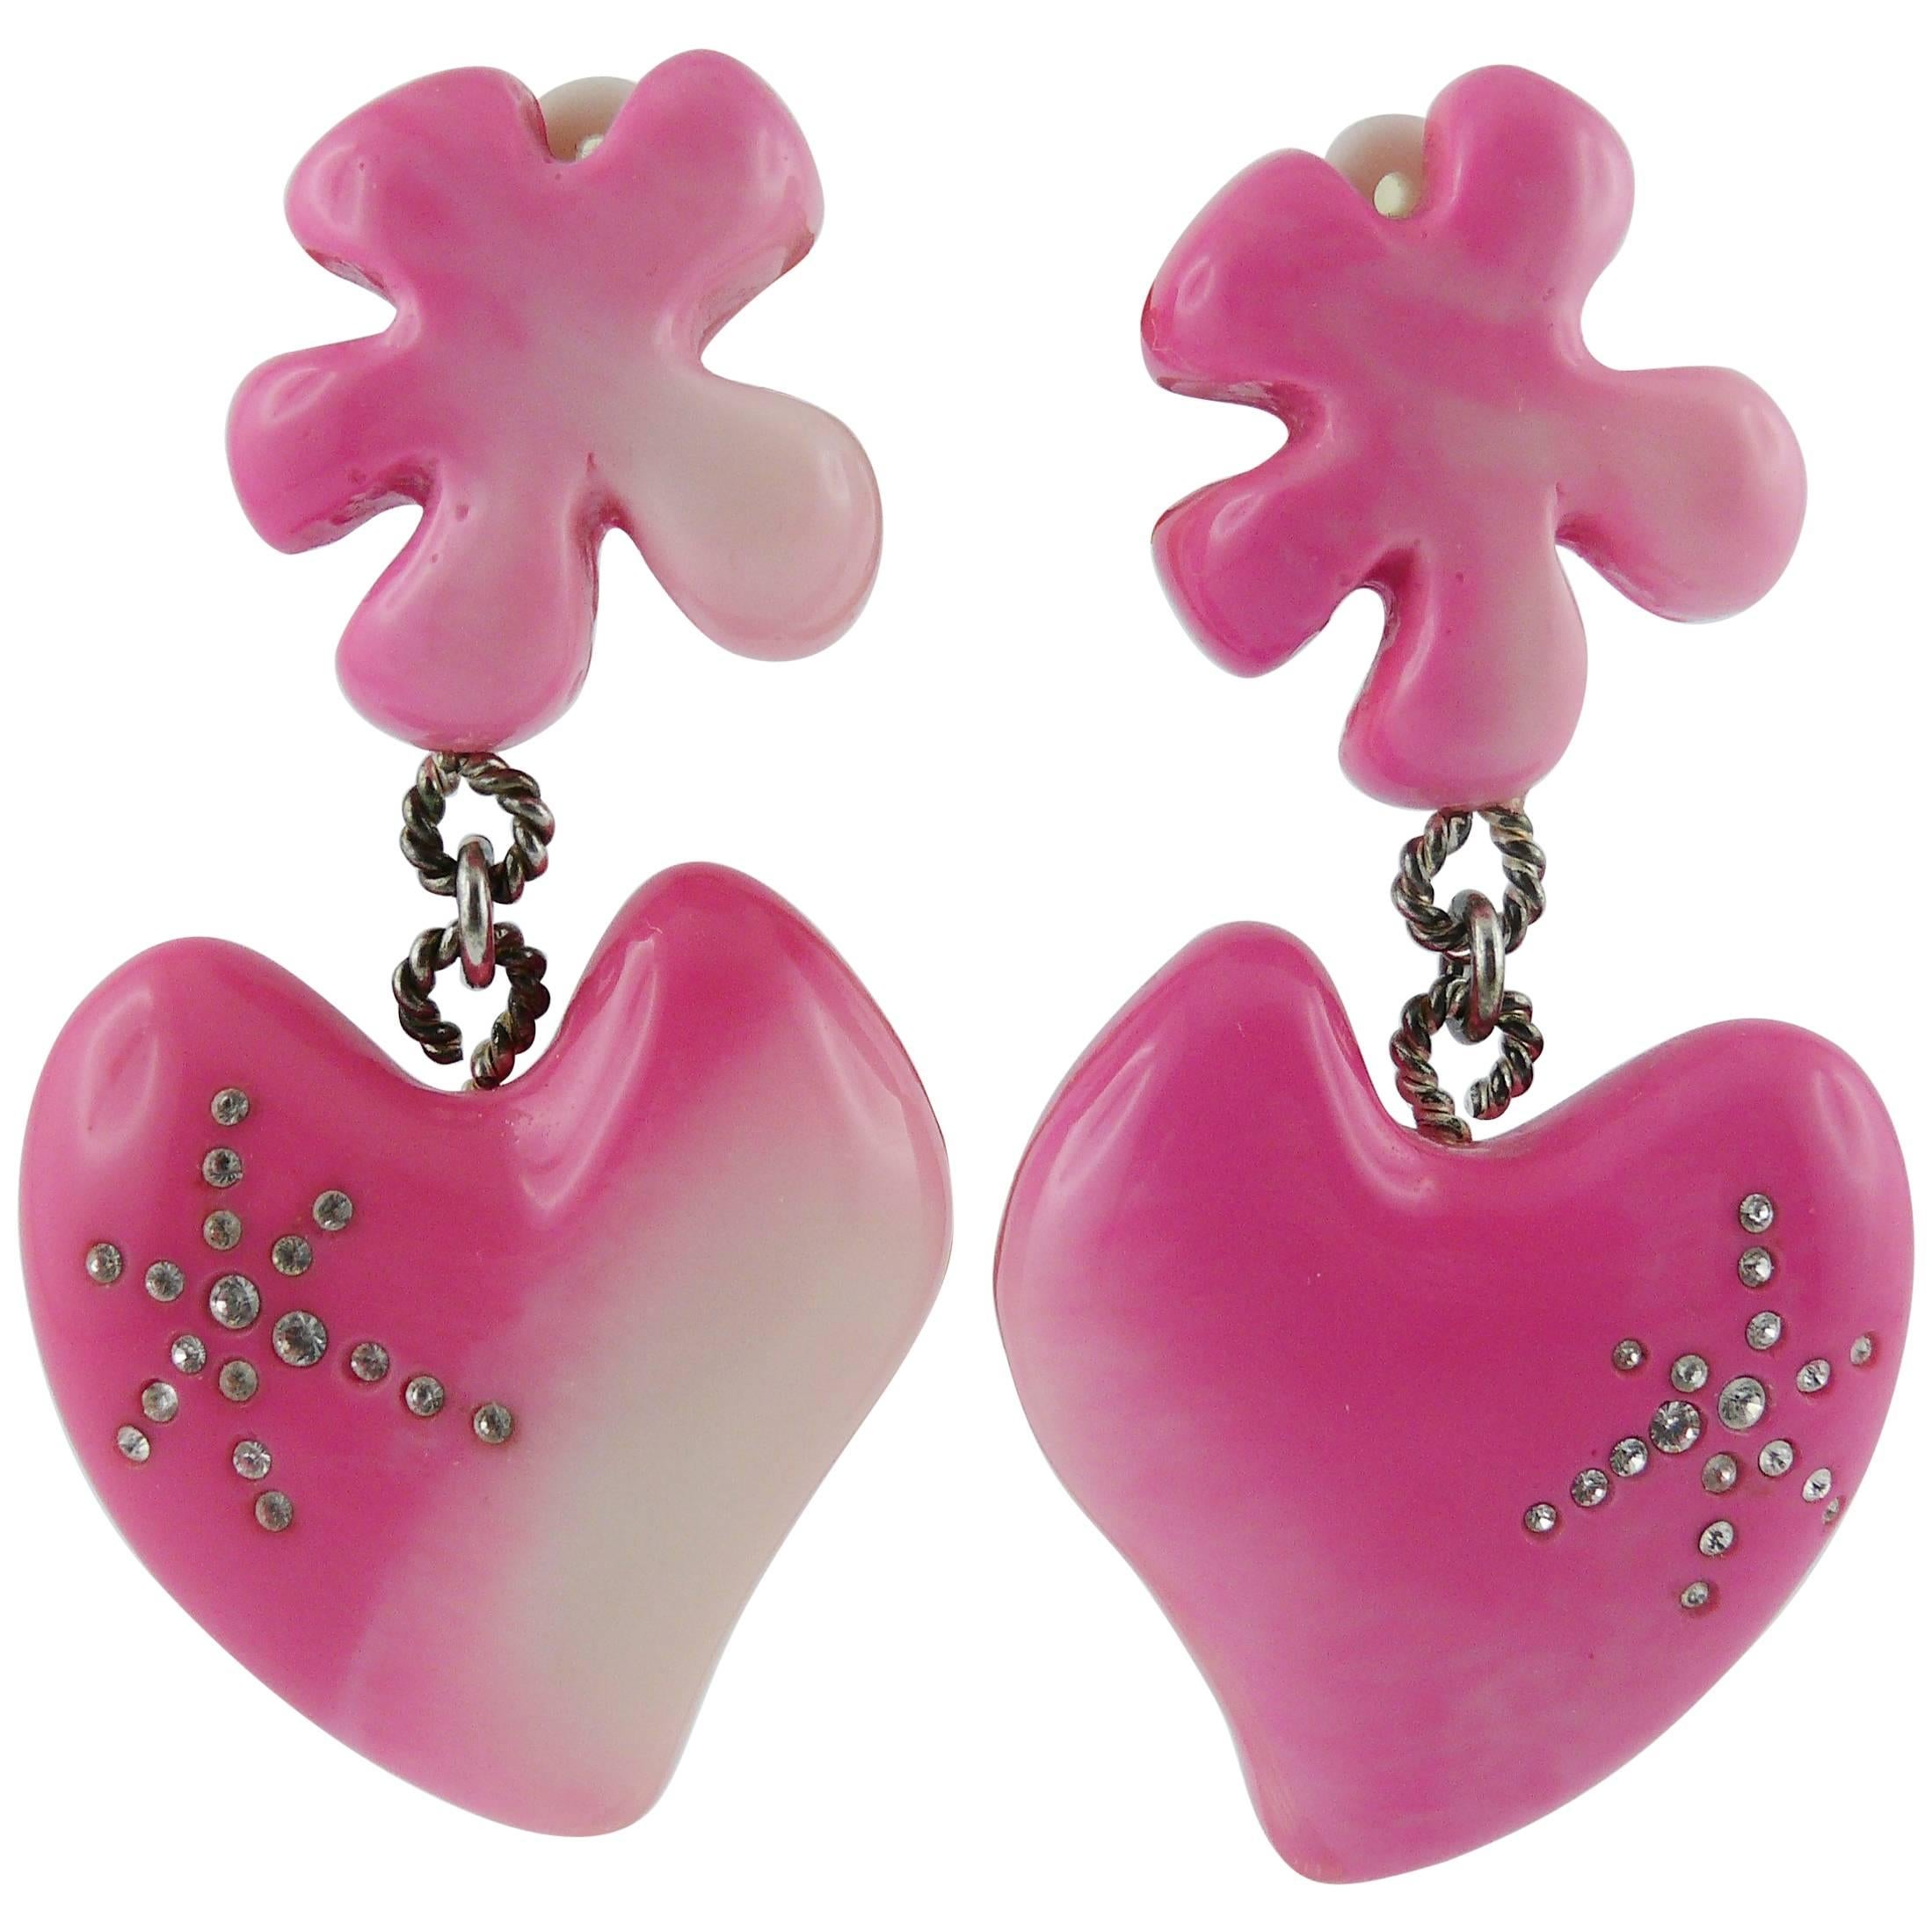 Christian Lacroix Vintage Candy Pink Heart Dangling Earrings